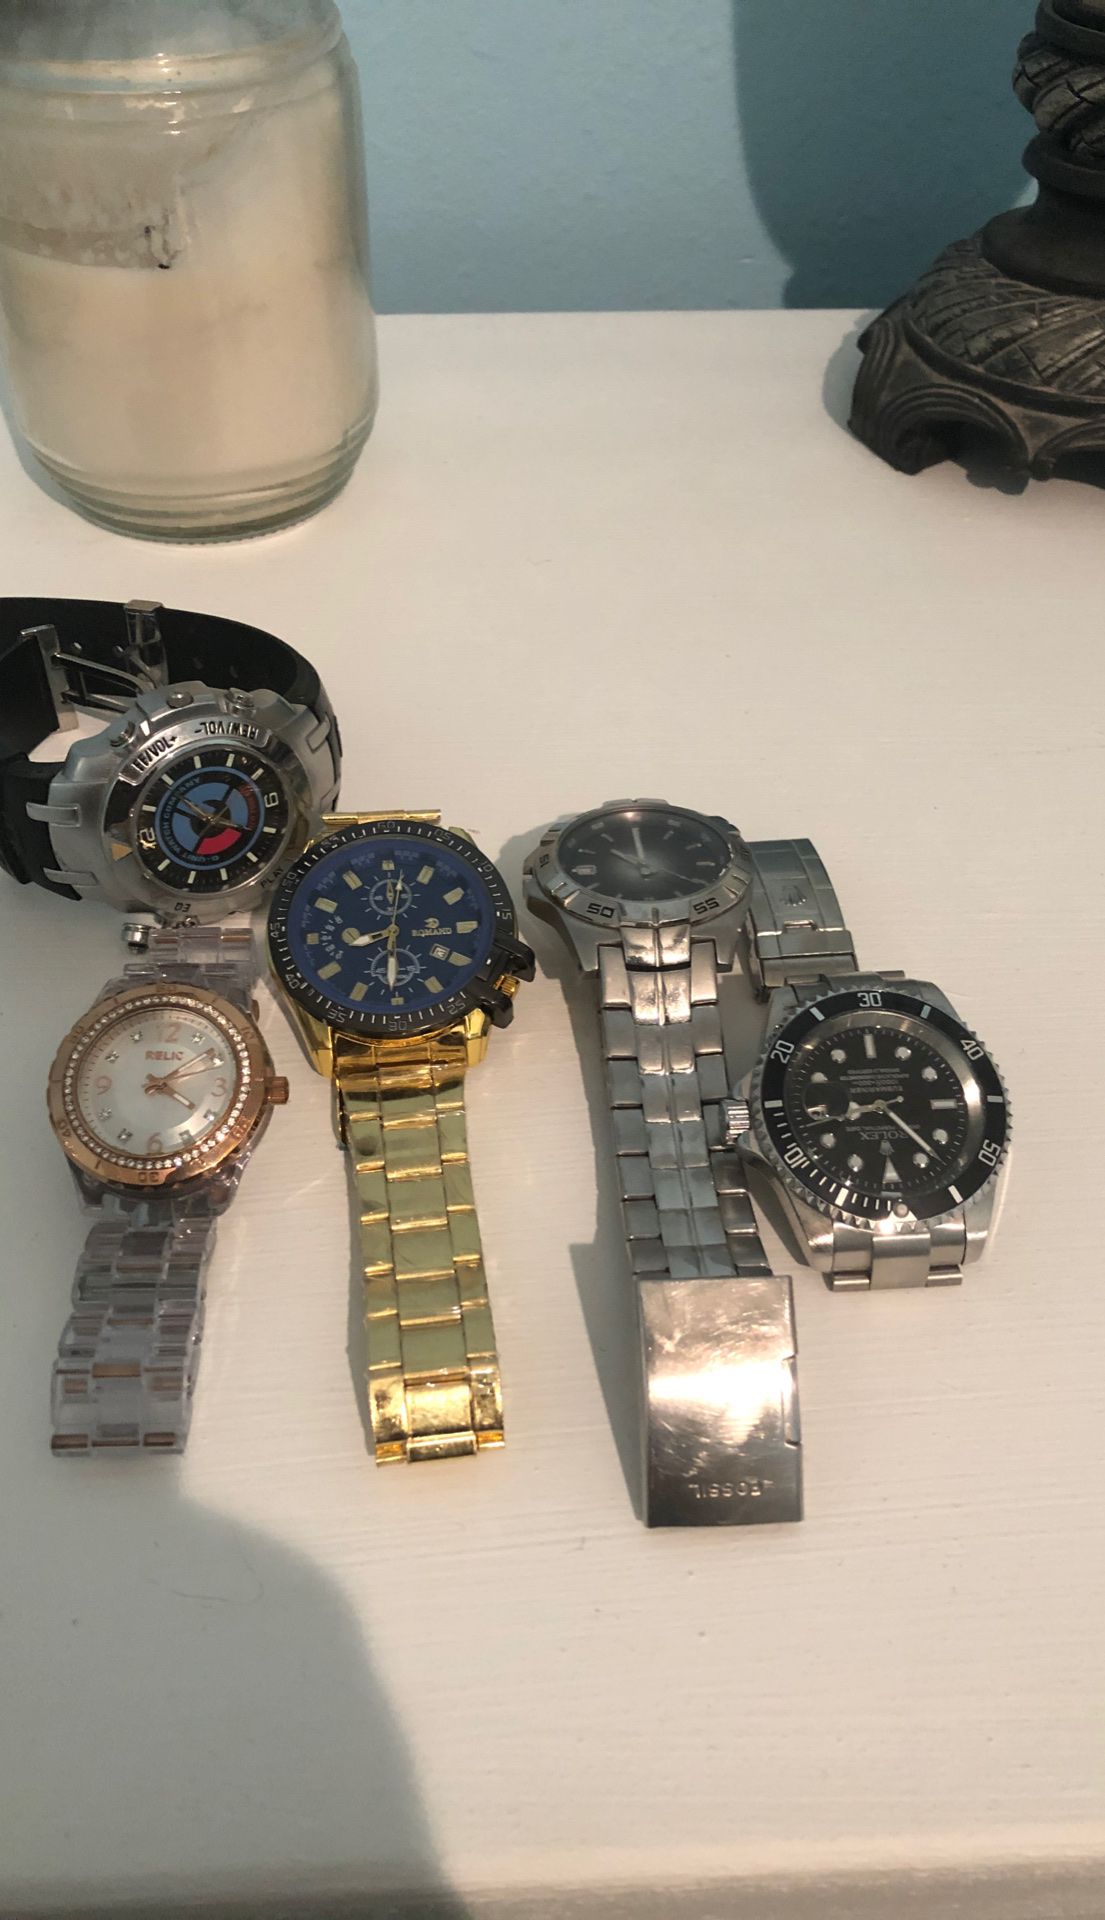 Watches and a laptop